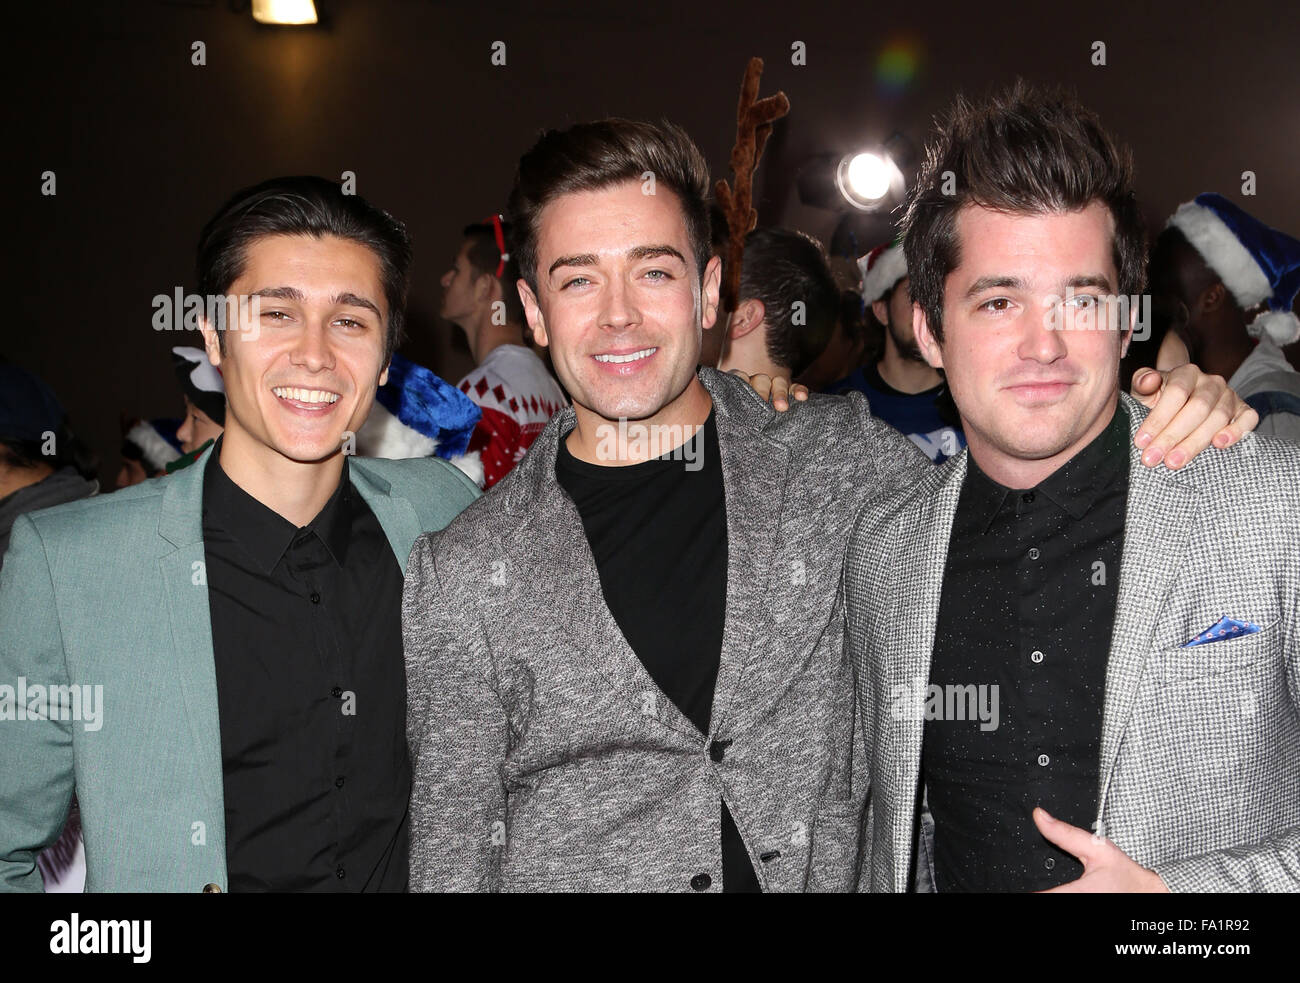 Los Angeles premiere of 'The Night Before' at the ACE Hotel - Arrivals  Featuring: Aleksey Lopez, Kristopher James, Kyle Carpenter of the boy band The Scheme Where: Los Angeles, California, United States When: 18 Nov 2015 Stock Photo